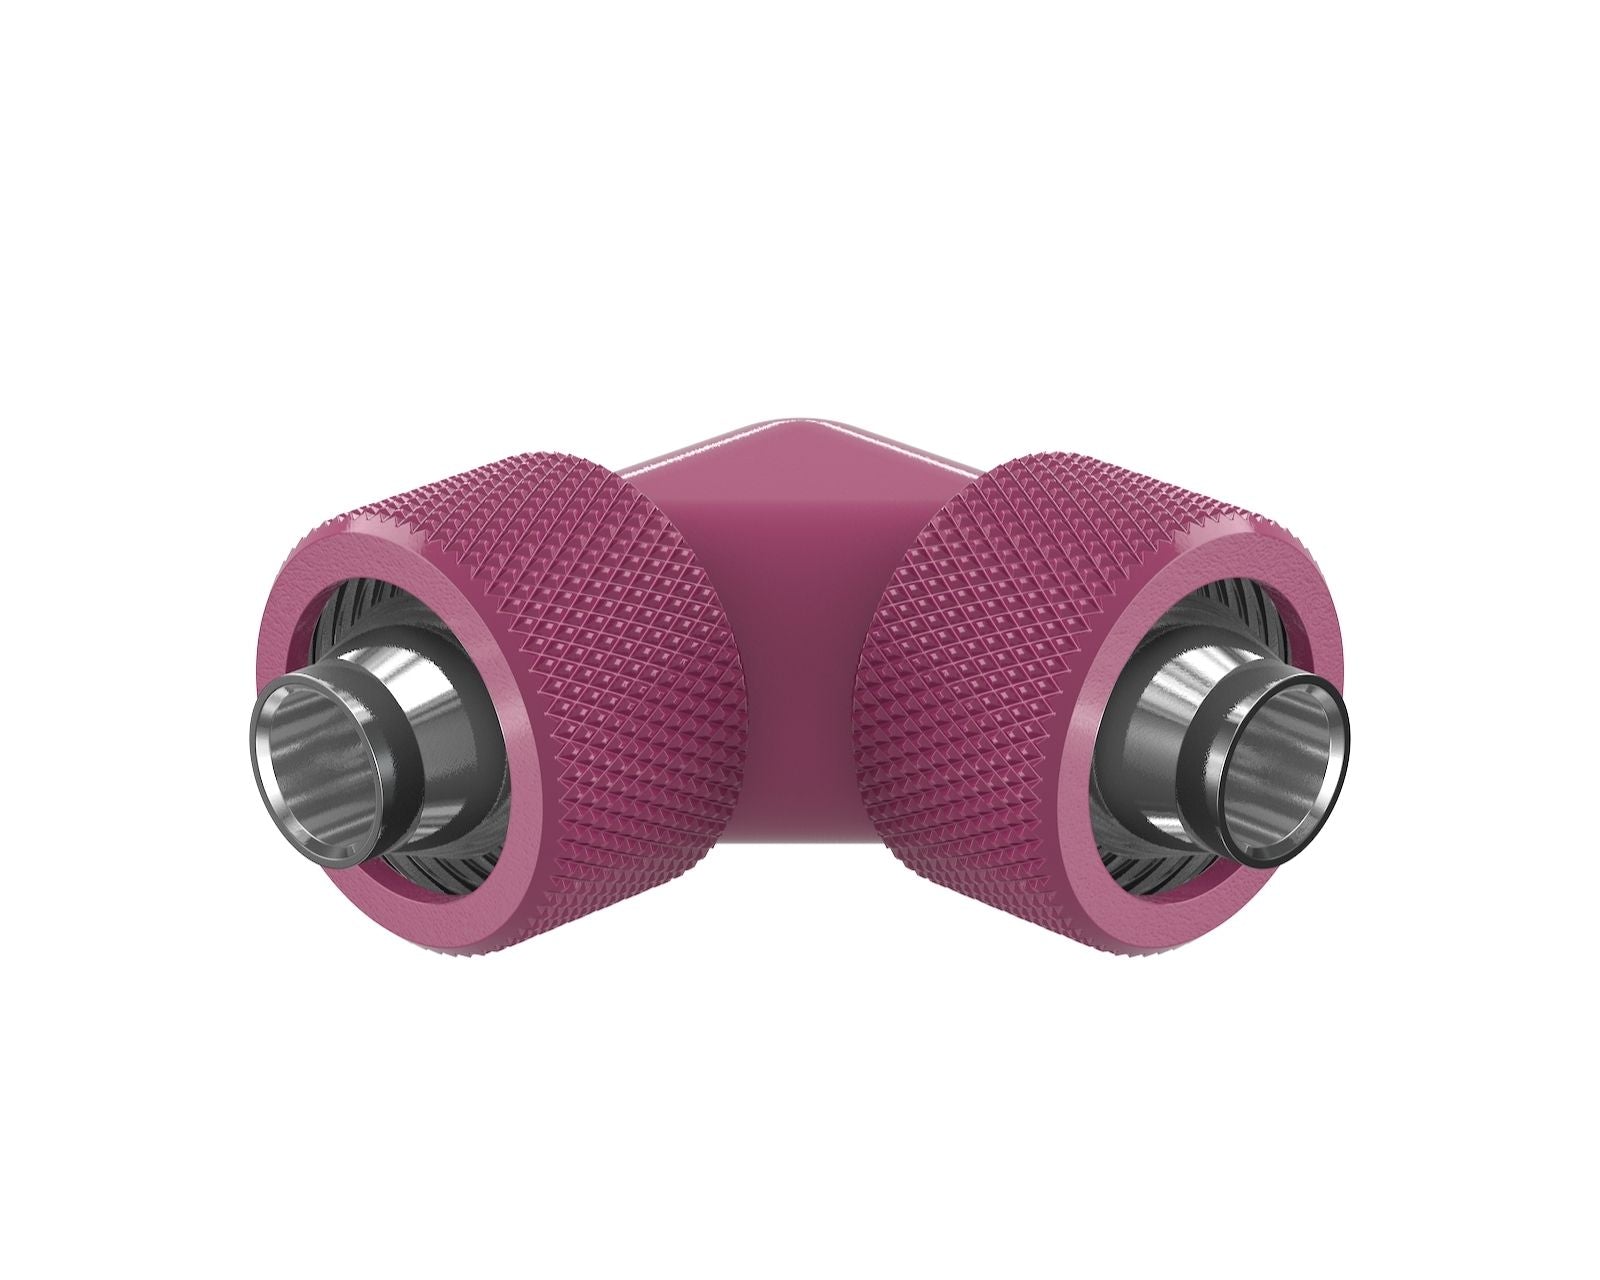 PrimoChill SecureFit SX - Premium 90 Degree Compression Fitting Set For 3/8in ID x 5/8in OD Flexible Tubing (F-SFSX5890) - Available in 20+ Colors, Custom Watercooling Loop Ready - Magenta